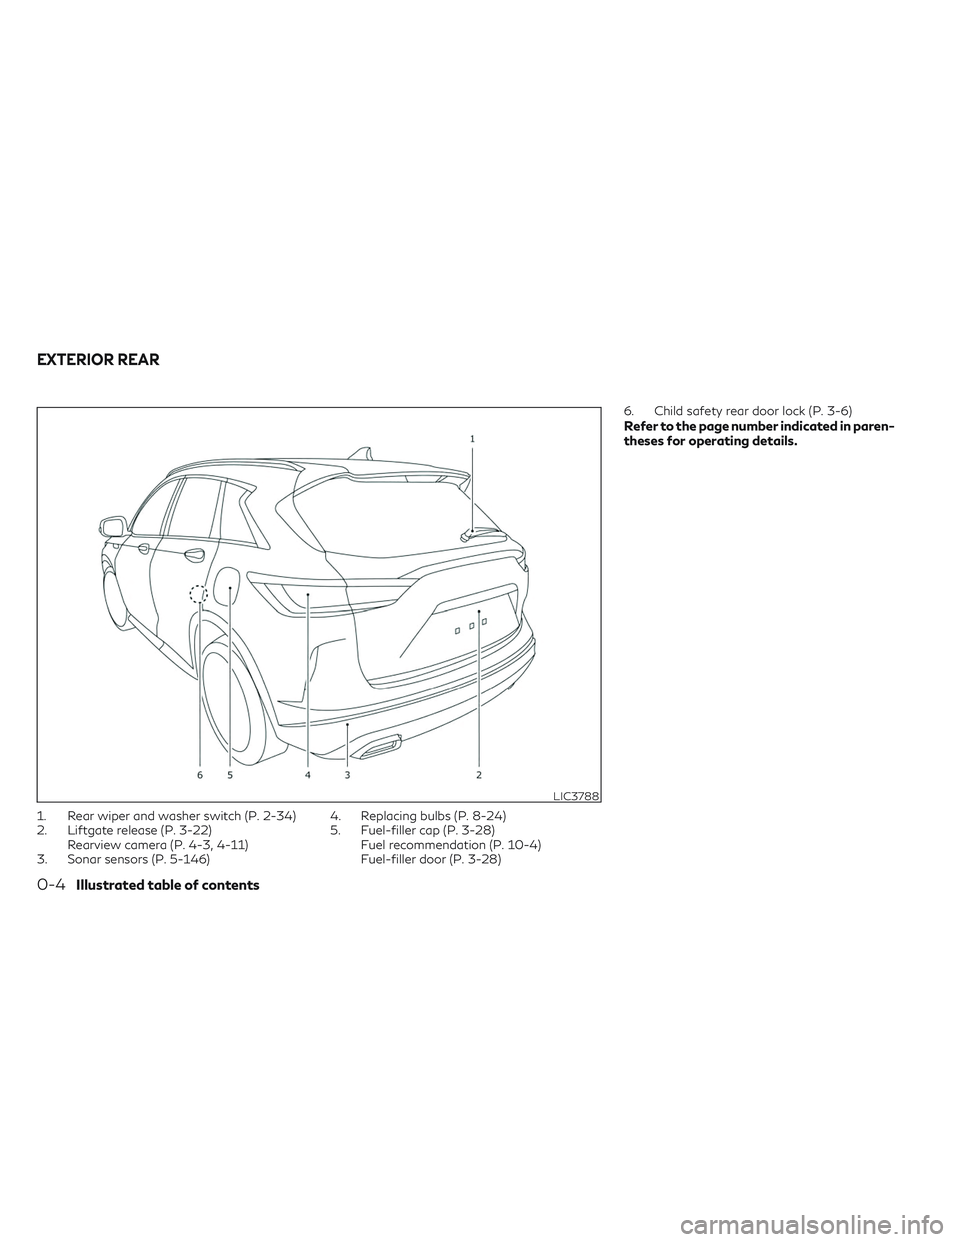 INFINITI QX50 2022  Owners Manual 1. Rear wiper and washer switch (P. 2-34)
2. Liftgate release (P. 3-22)Rearview camera (P. 4-3, 4-11)
3. Sonar sensors (P. 5-146) 4. Replacing bulbs (P. 8-24)
5. Fuel-filler cap (P. 3-28)
Fuel recomme